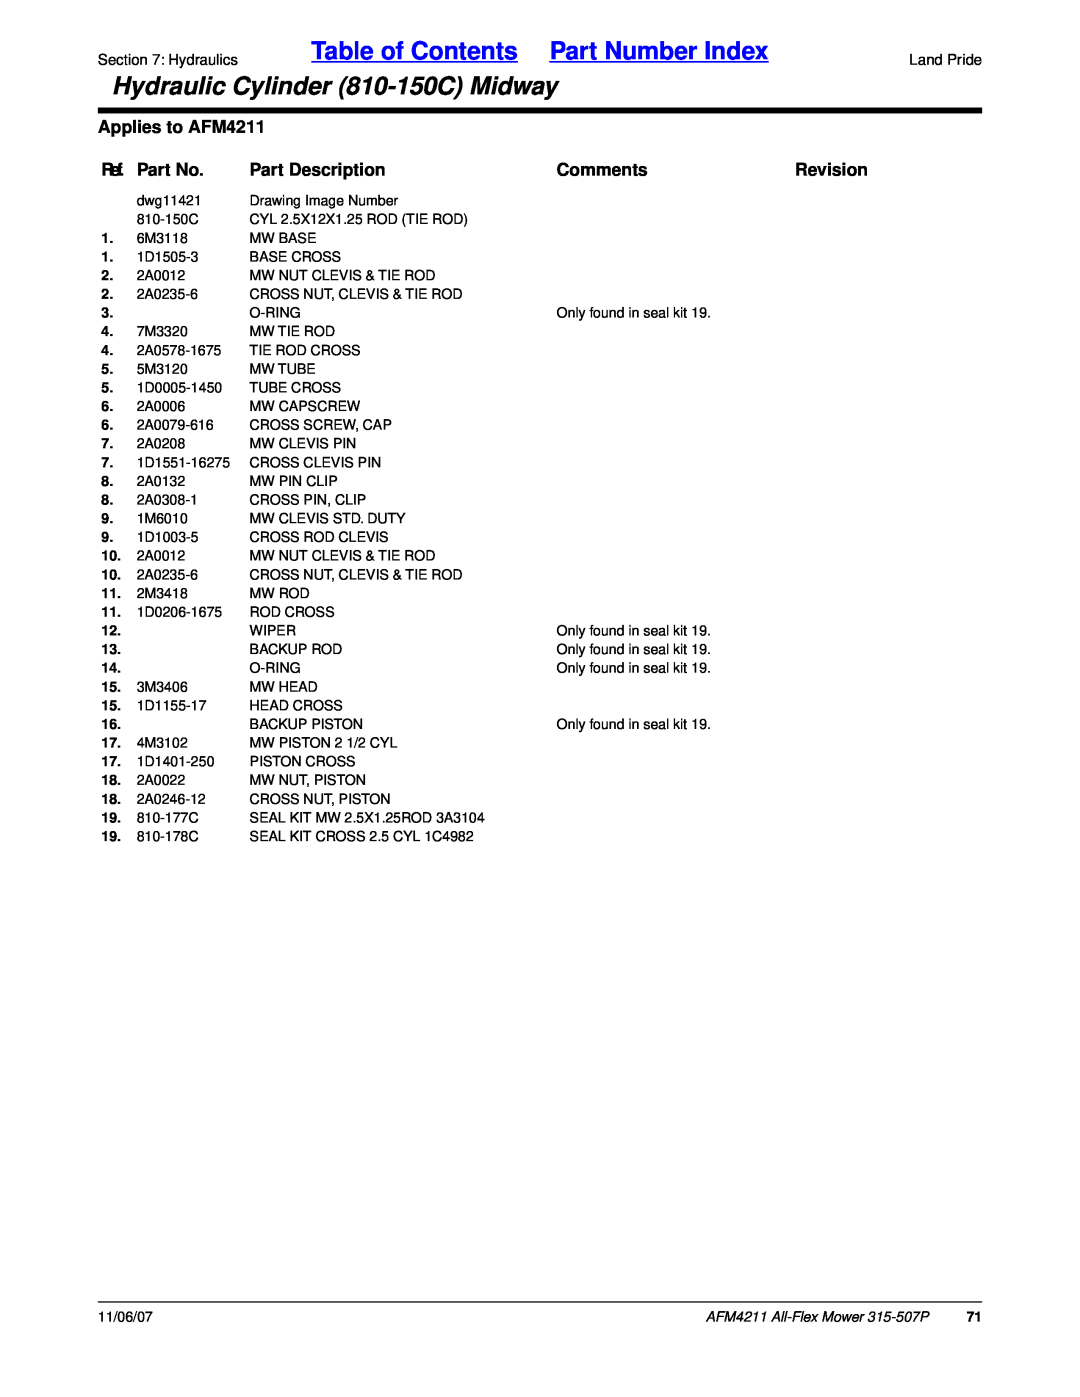 Land Pride 315-507P Table of Contents Part Number Index, Hydraulic Cylinder 810-150CMidway, Applies to AFM4211, Comments 